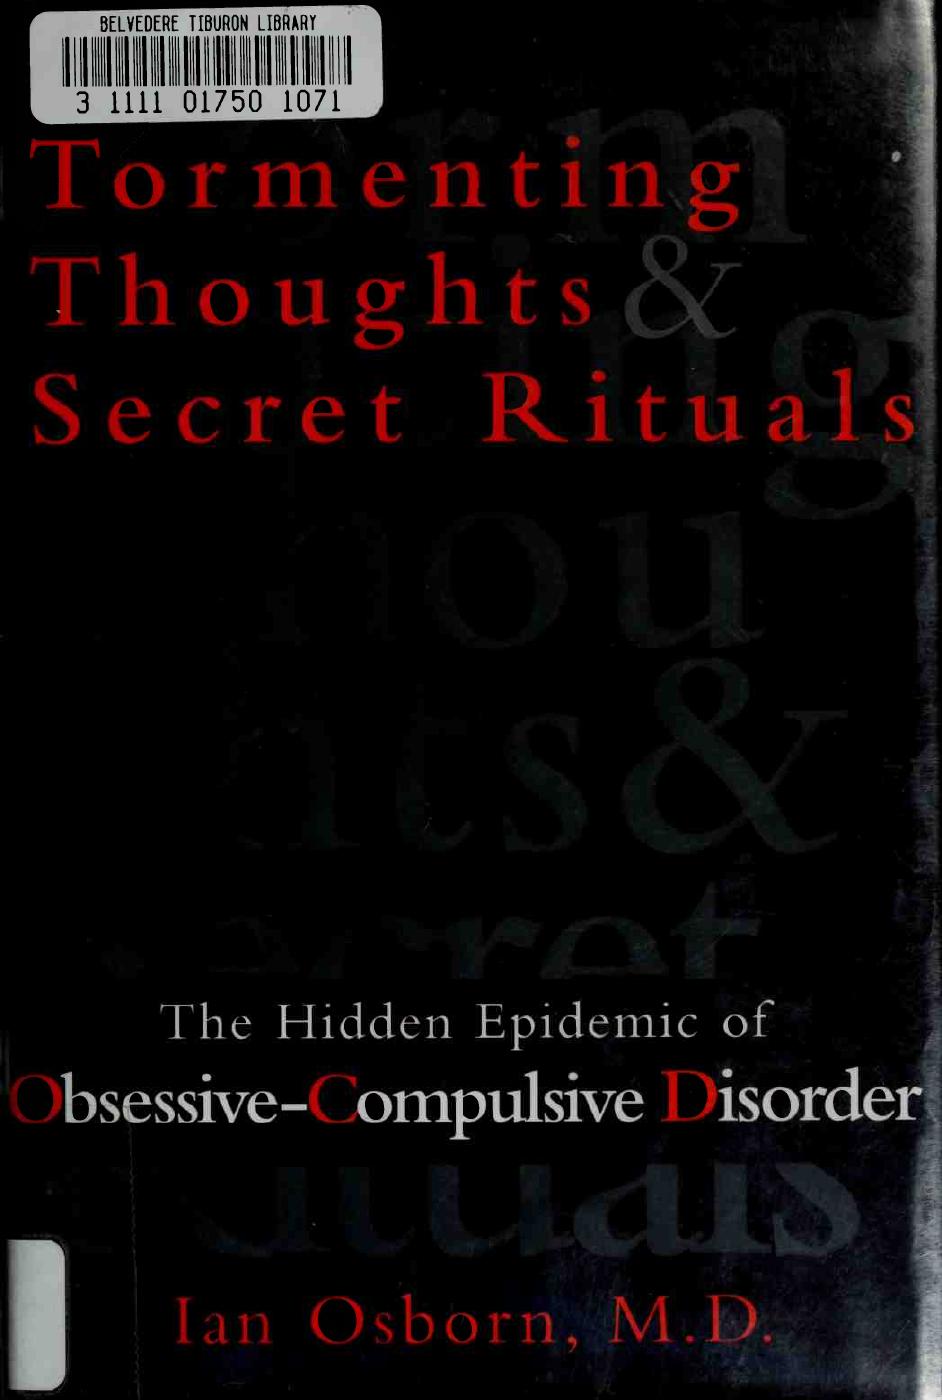 Tormenting Thoughts and Secret Rituals by Ian Osborn